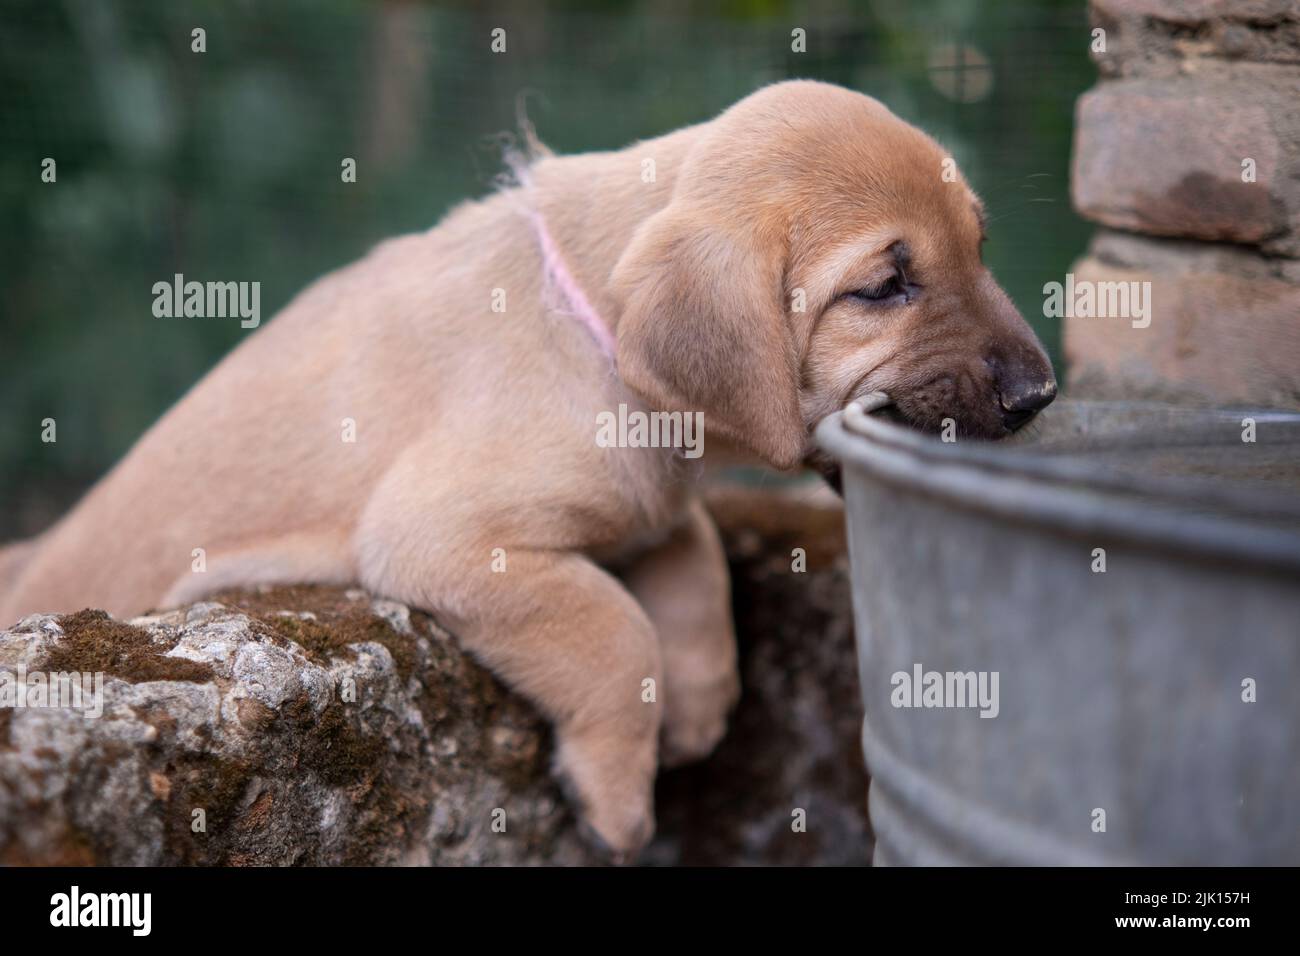 Broholmer puppy with a pink collar playing and biting at a steel bucket, Italy, Europe Stock Photo